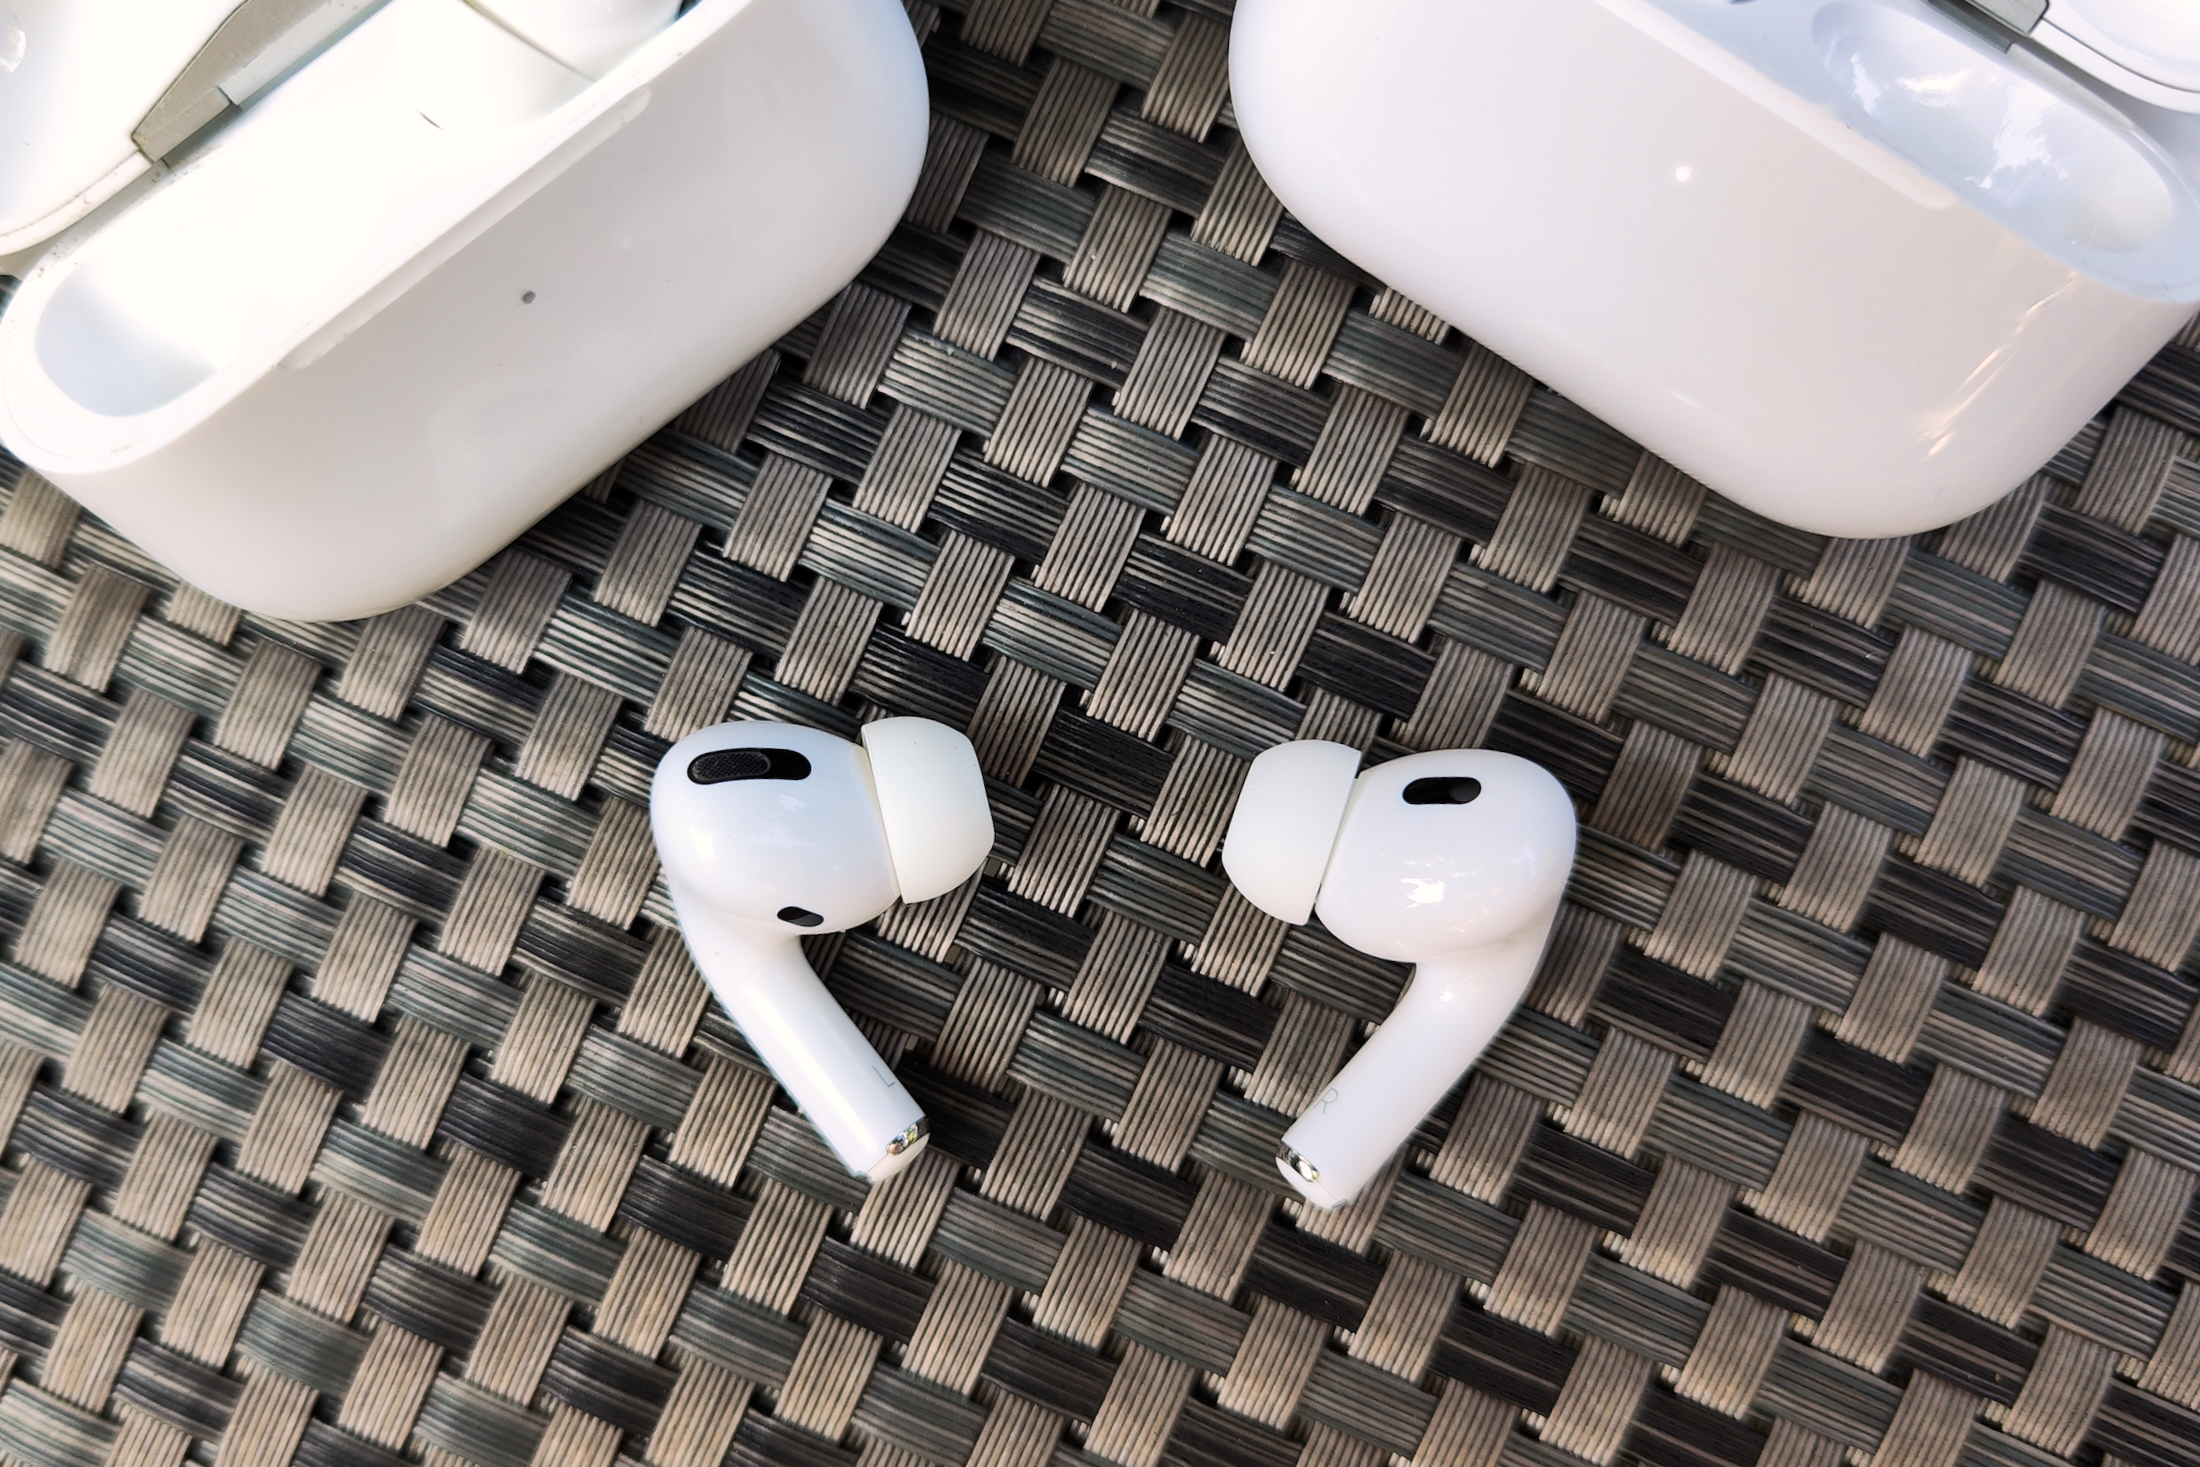 Apple AirPods Pro 2 Vs AirPods Pro: What's The Difference?